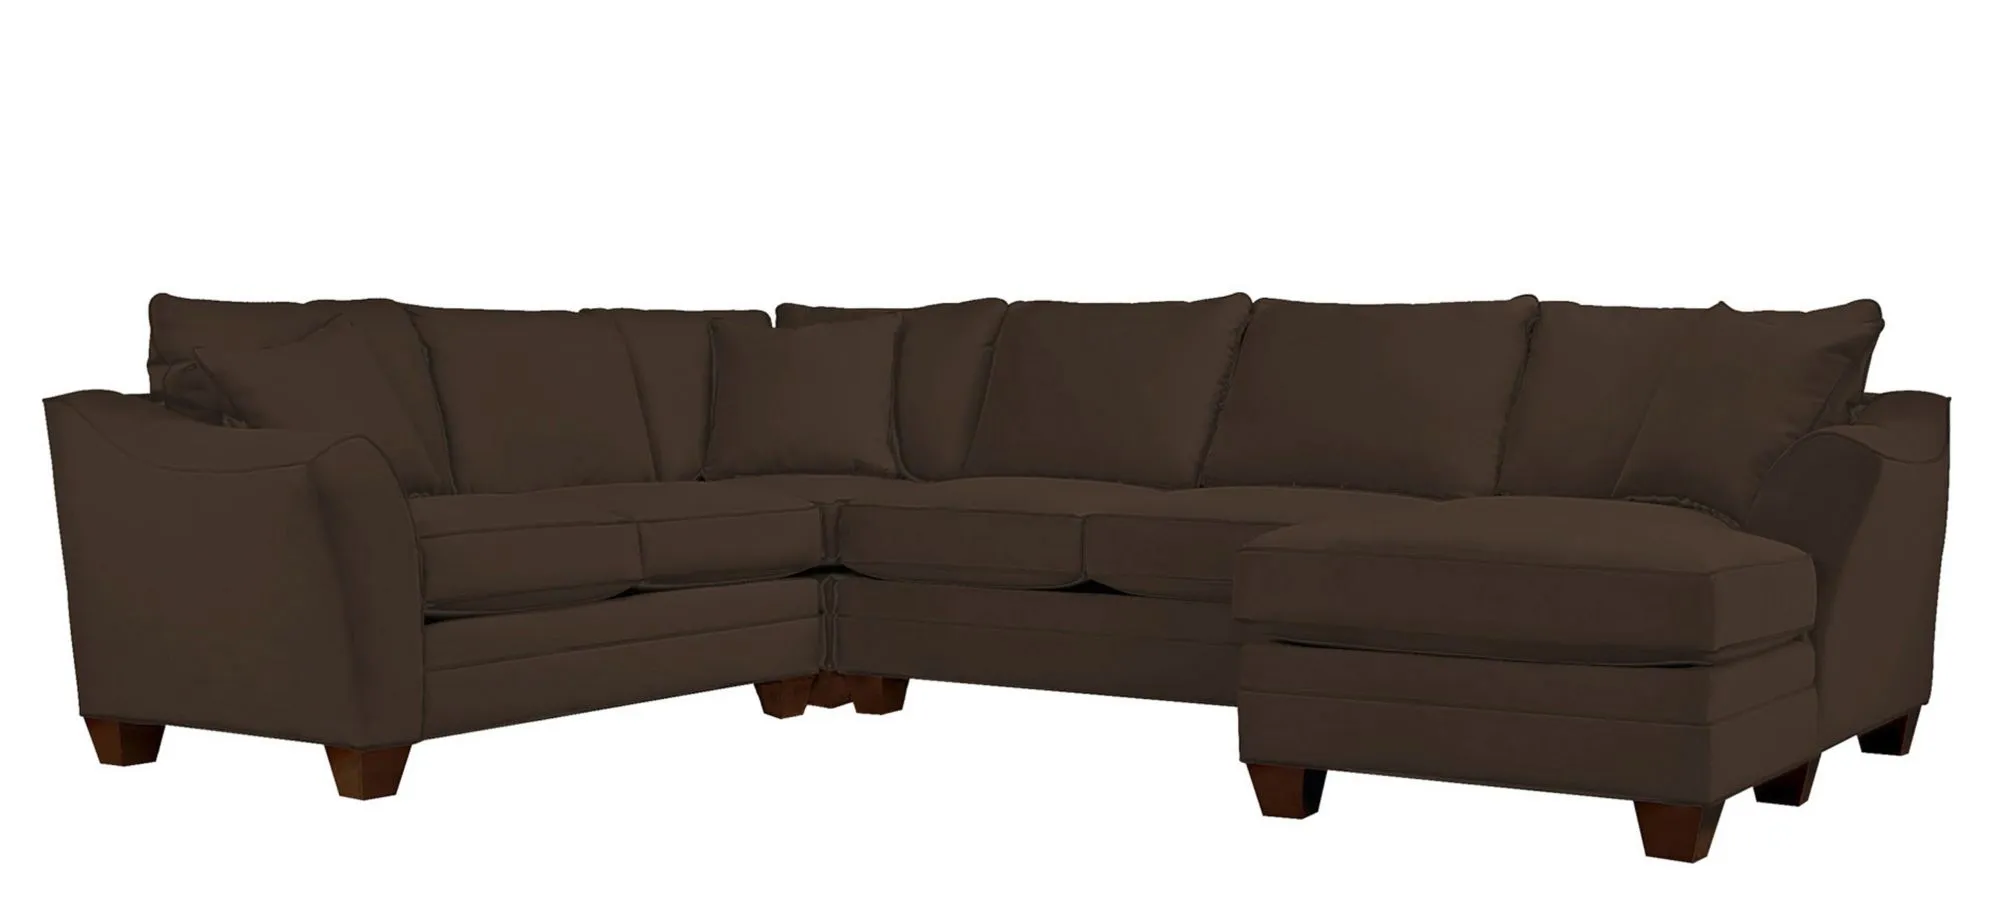 Foresthill 4-pc. Sectional w/ Right Arm Facing Chaise in Suede So Soft Chocolate by H.M. Richards